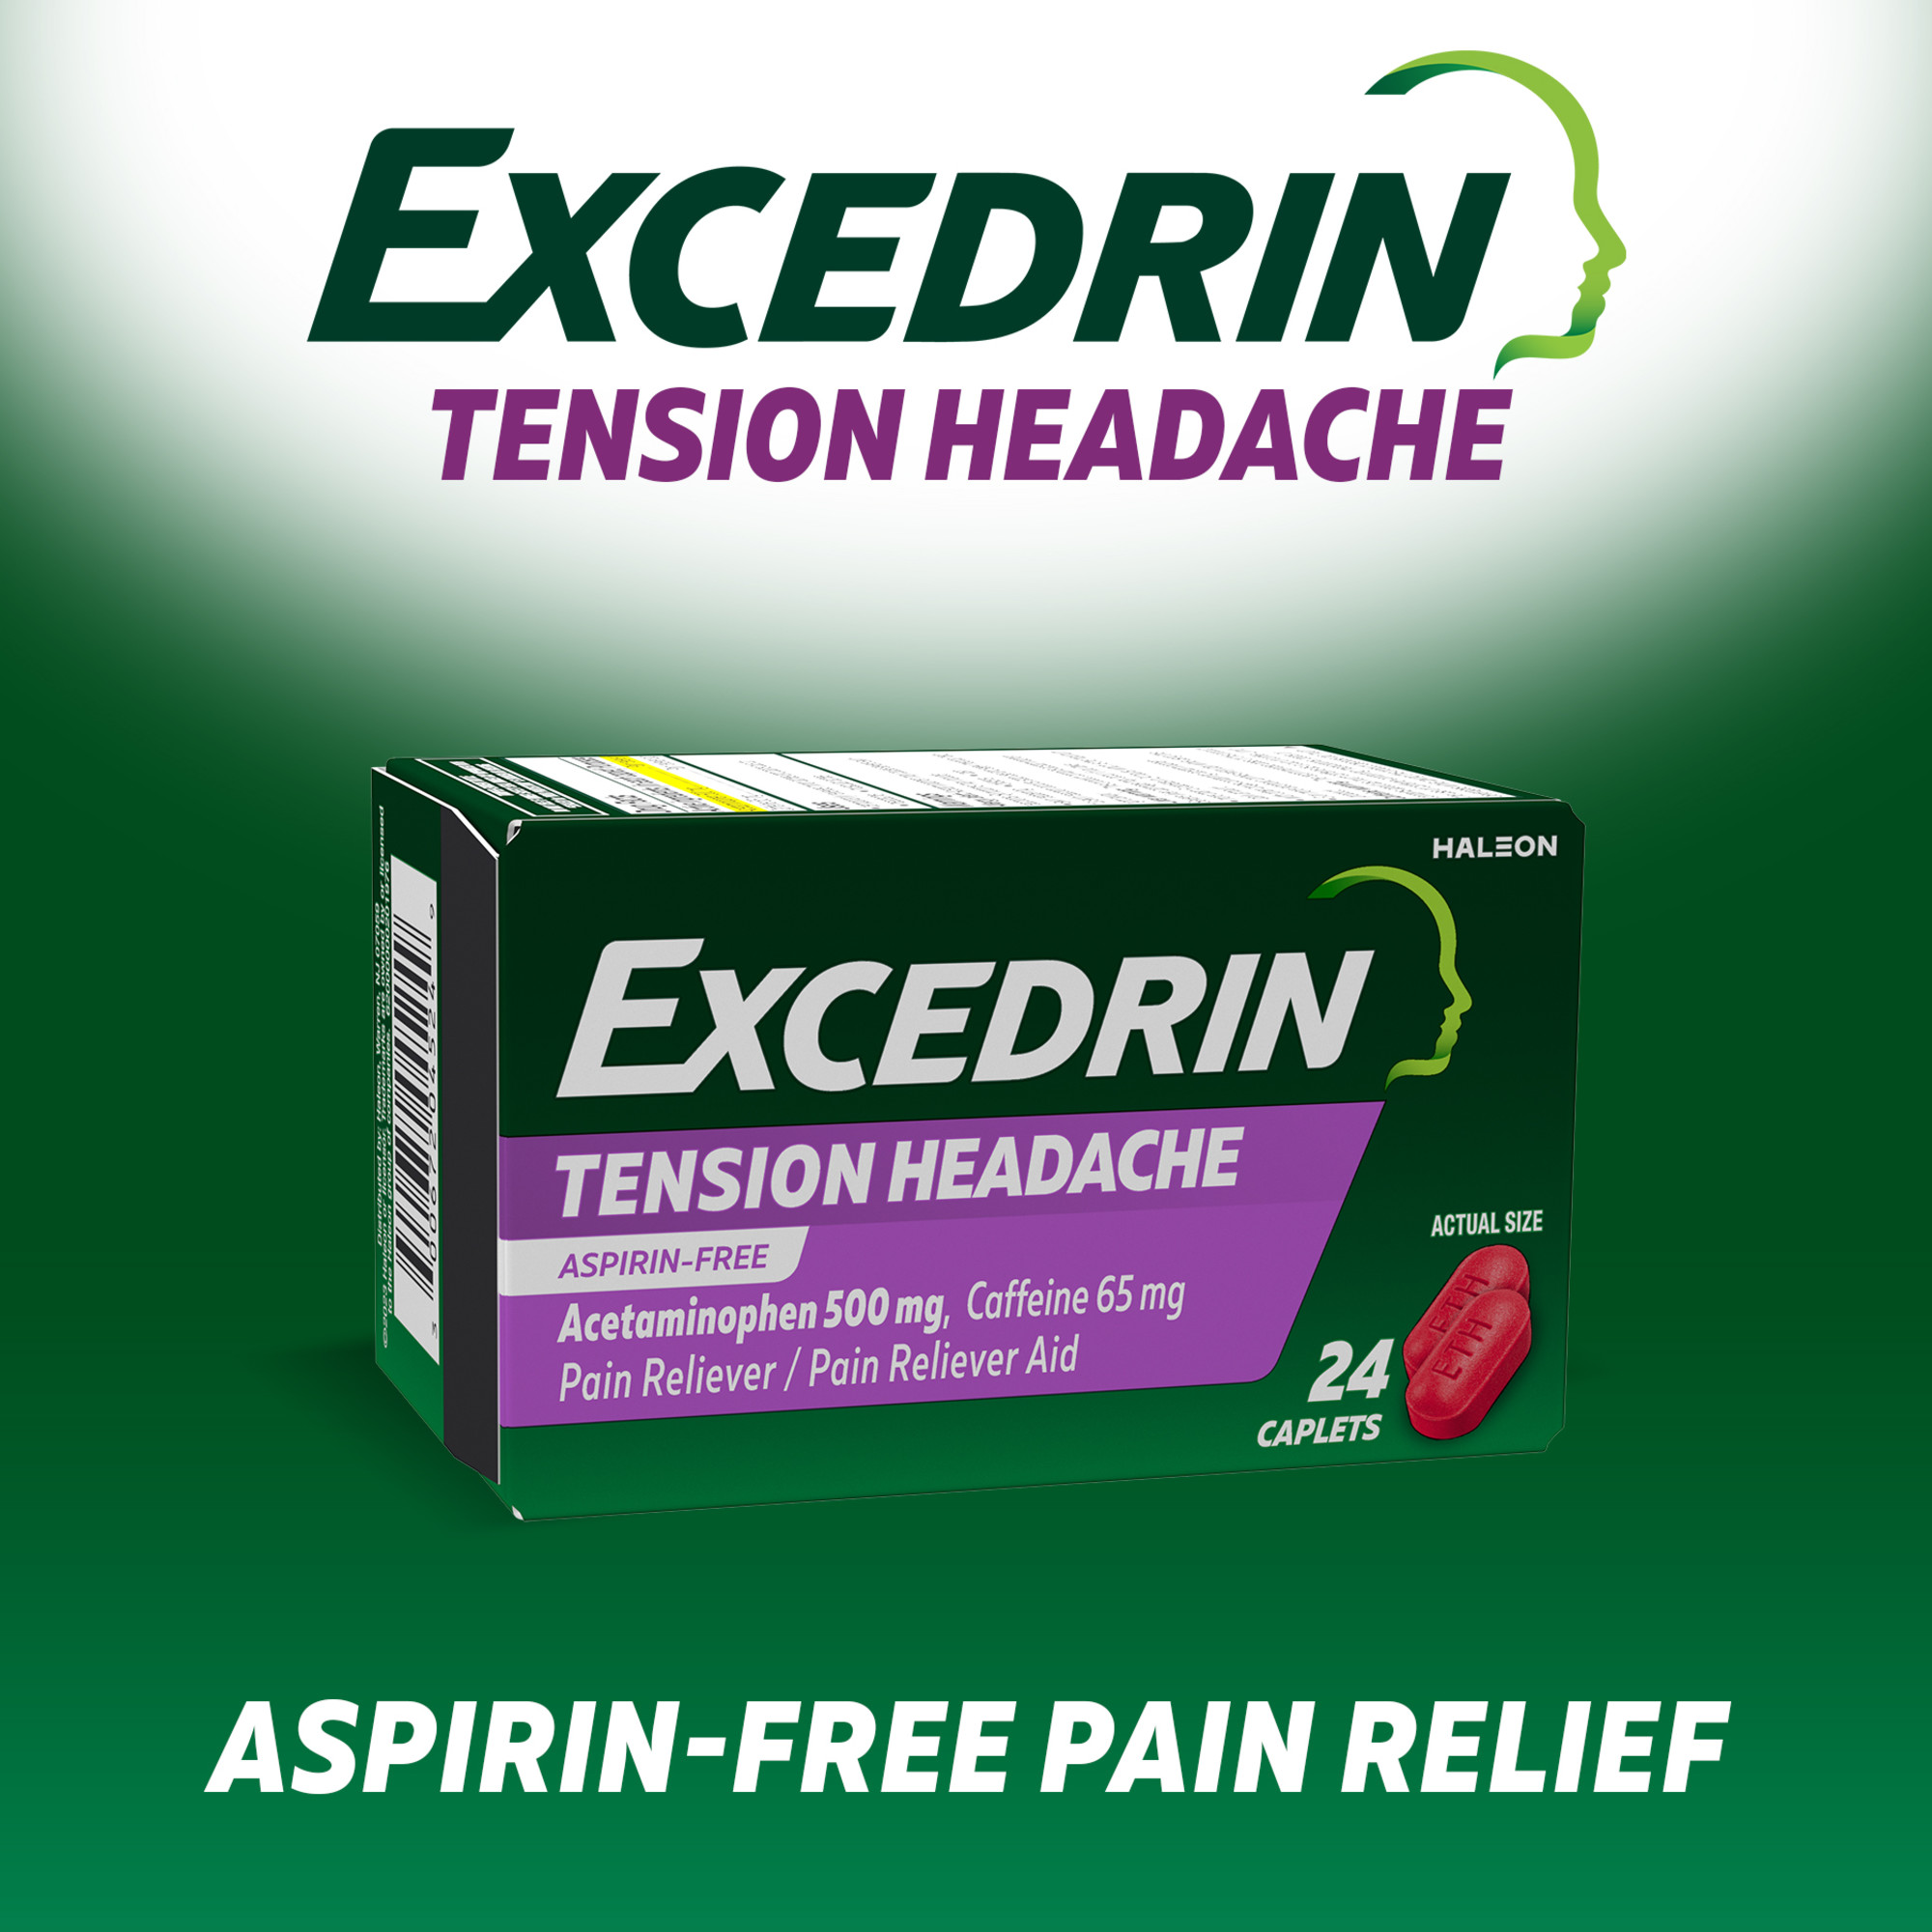 Excedrin Tension Headache Relief Acetaminophen and Caffeine Caplets, 100 Count - image 3 of 10